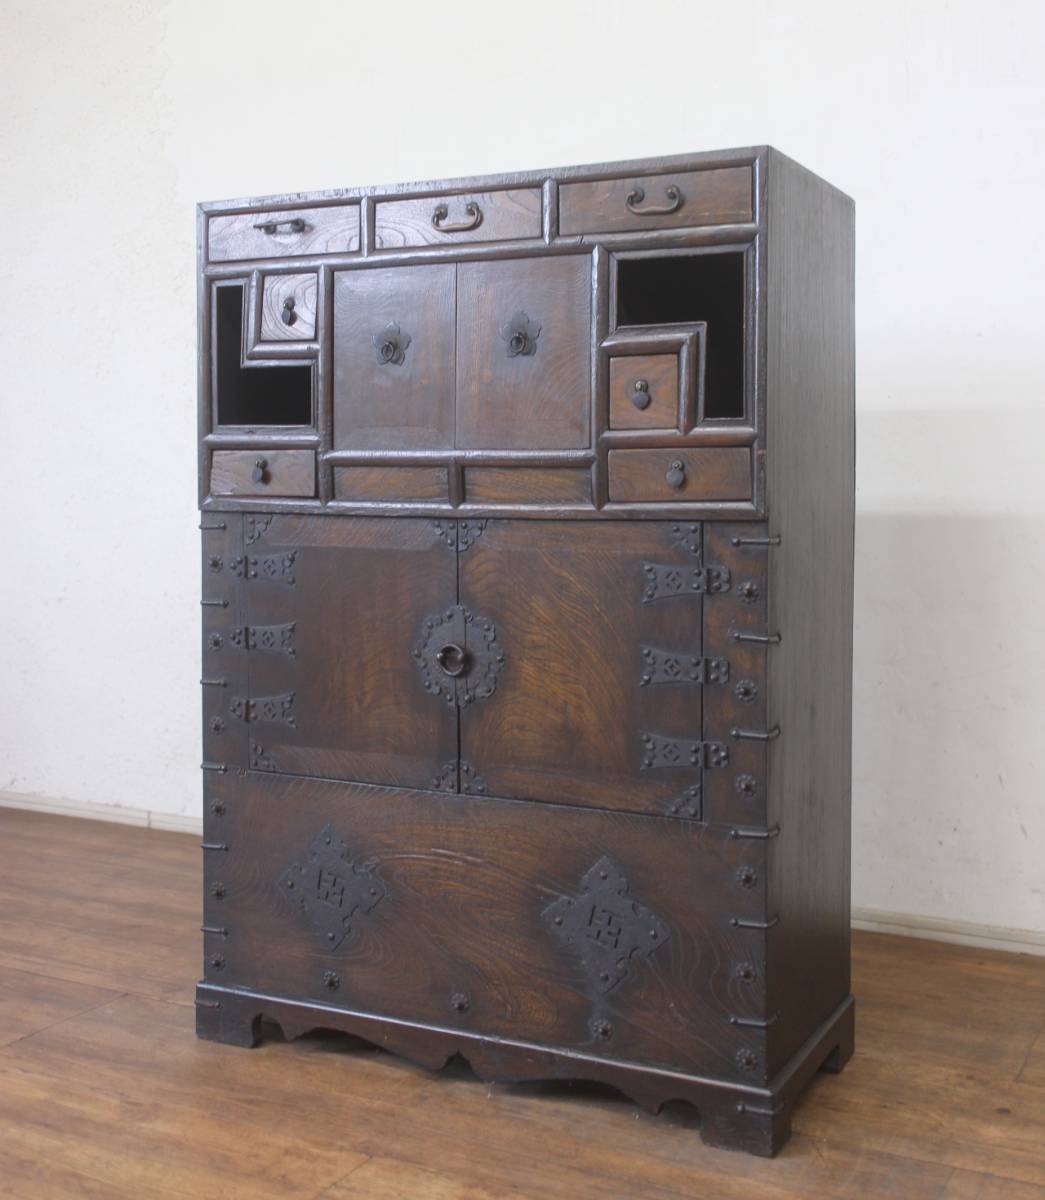 Furniture - Antique and collection - bidJDM